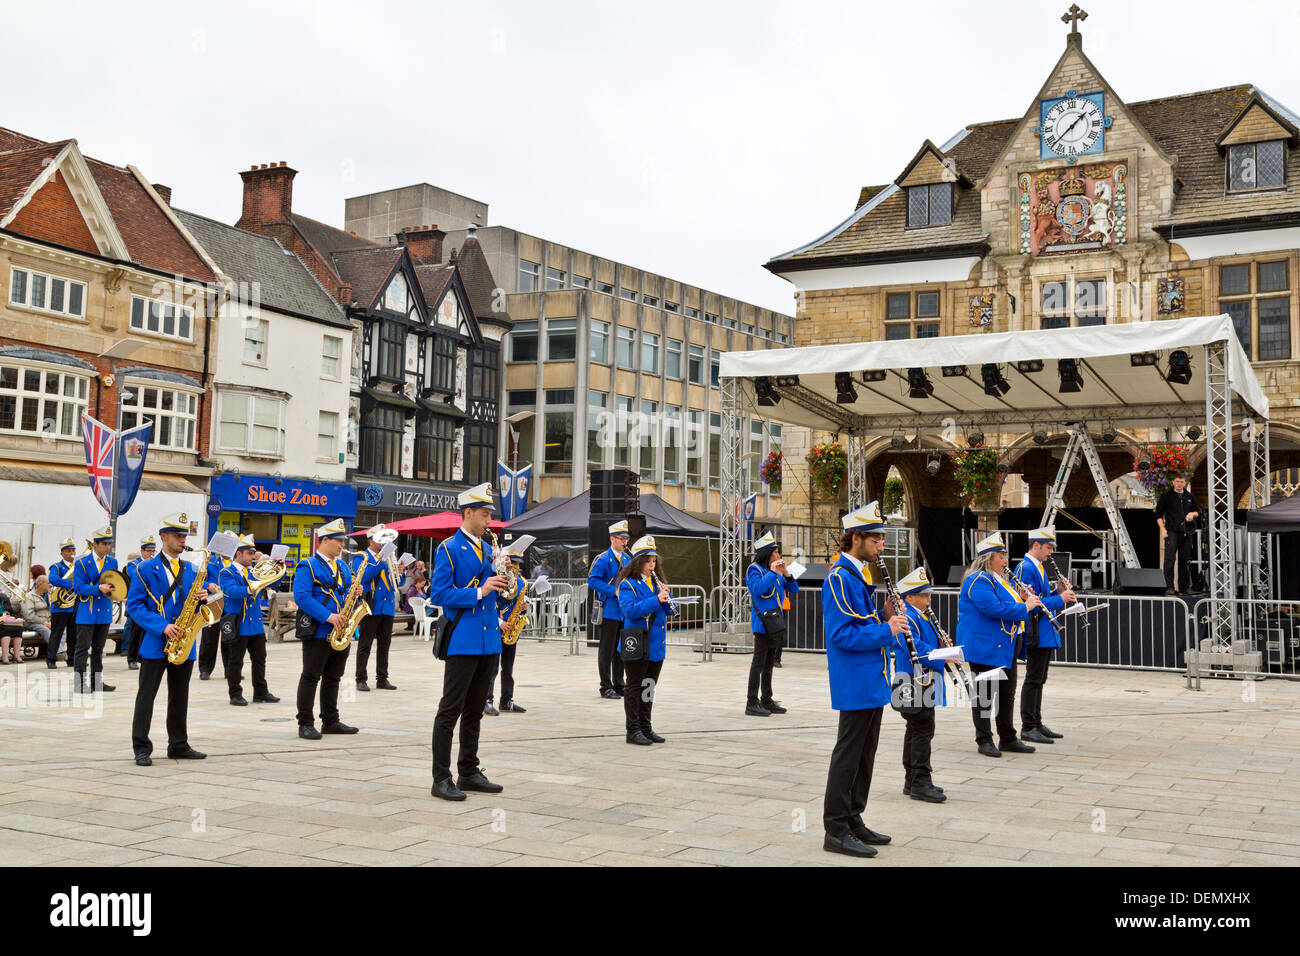 Marching band from the Foggia region of Italy performing during the Italian Festival in Peterborough, England Stock Photo